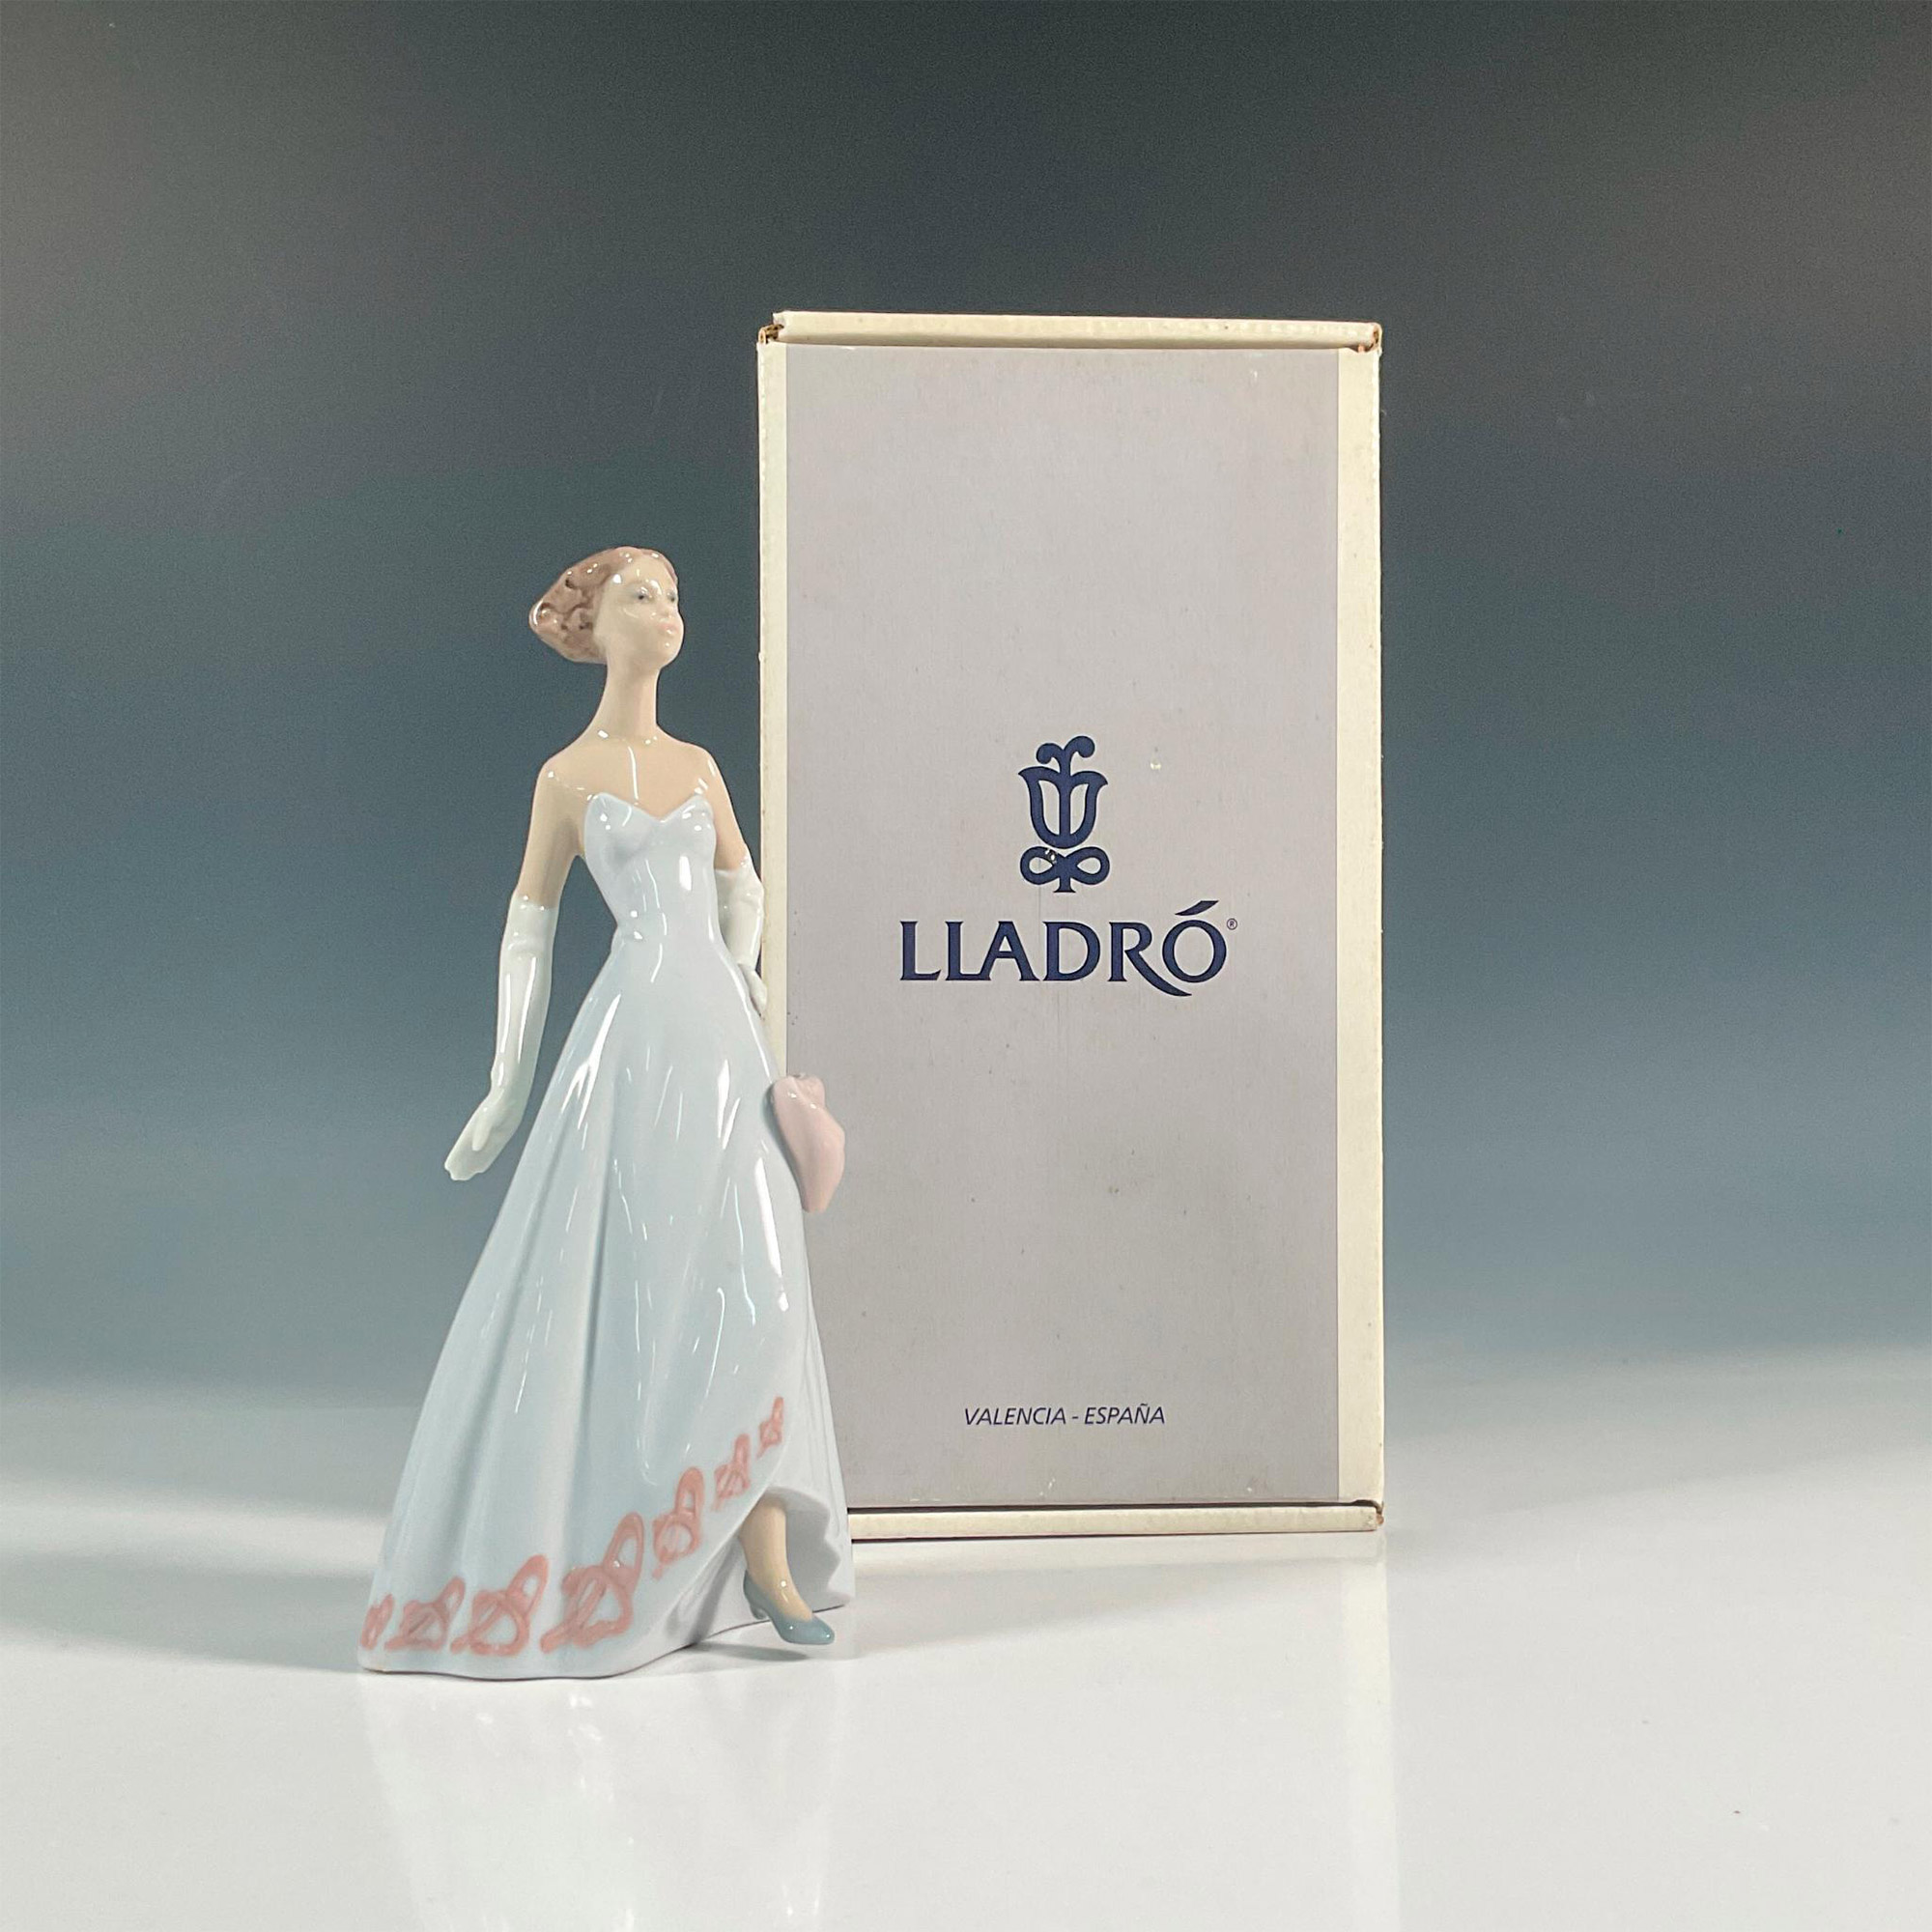 On The Runway 1006595 - Lladro Porcelain Figurine - Image 5 of 5